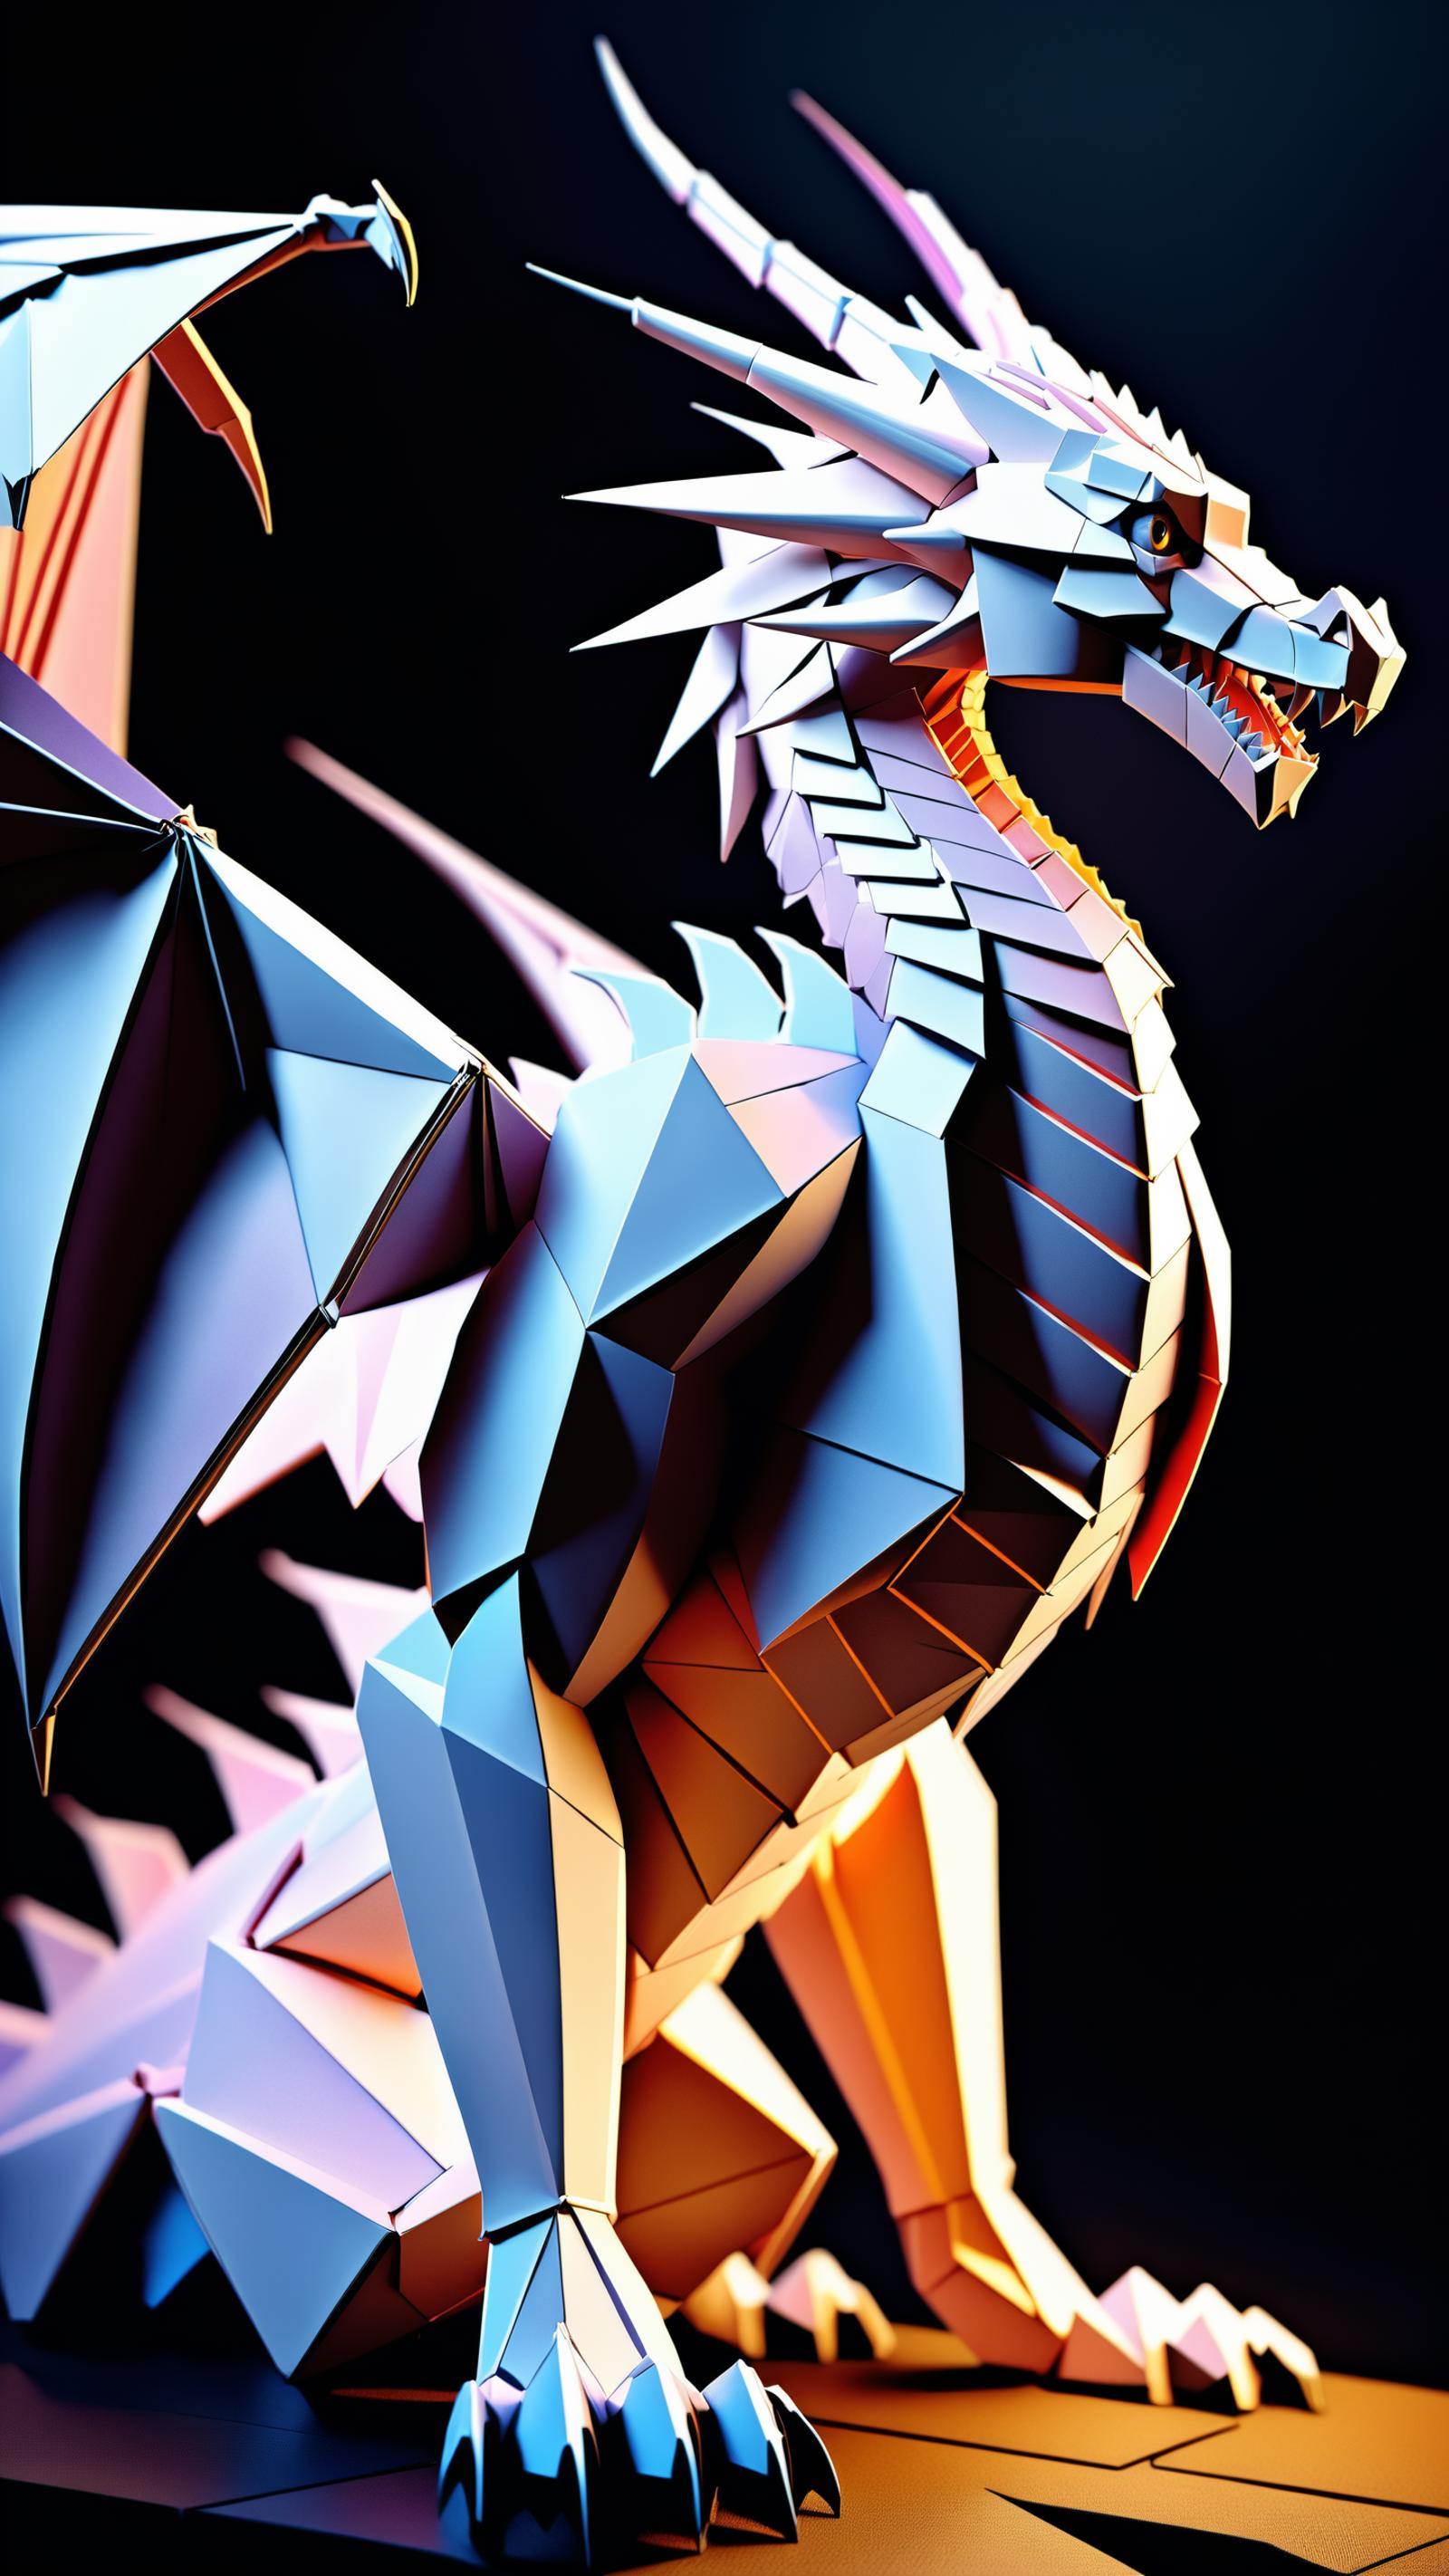 3D Dragon Model with Blue and Pink Color Scheme